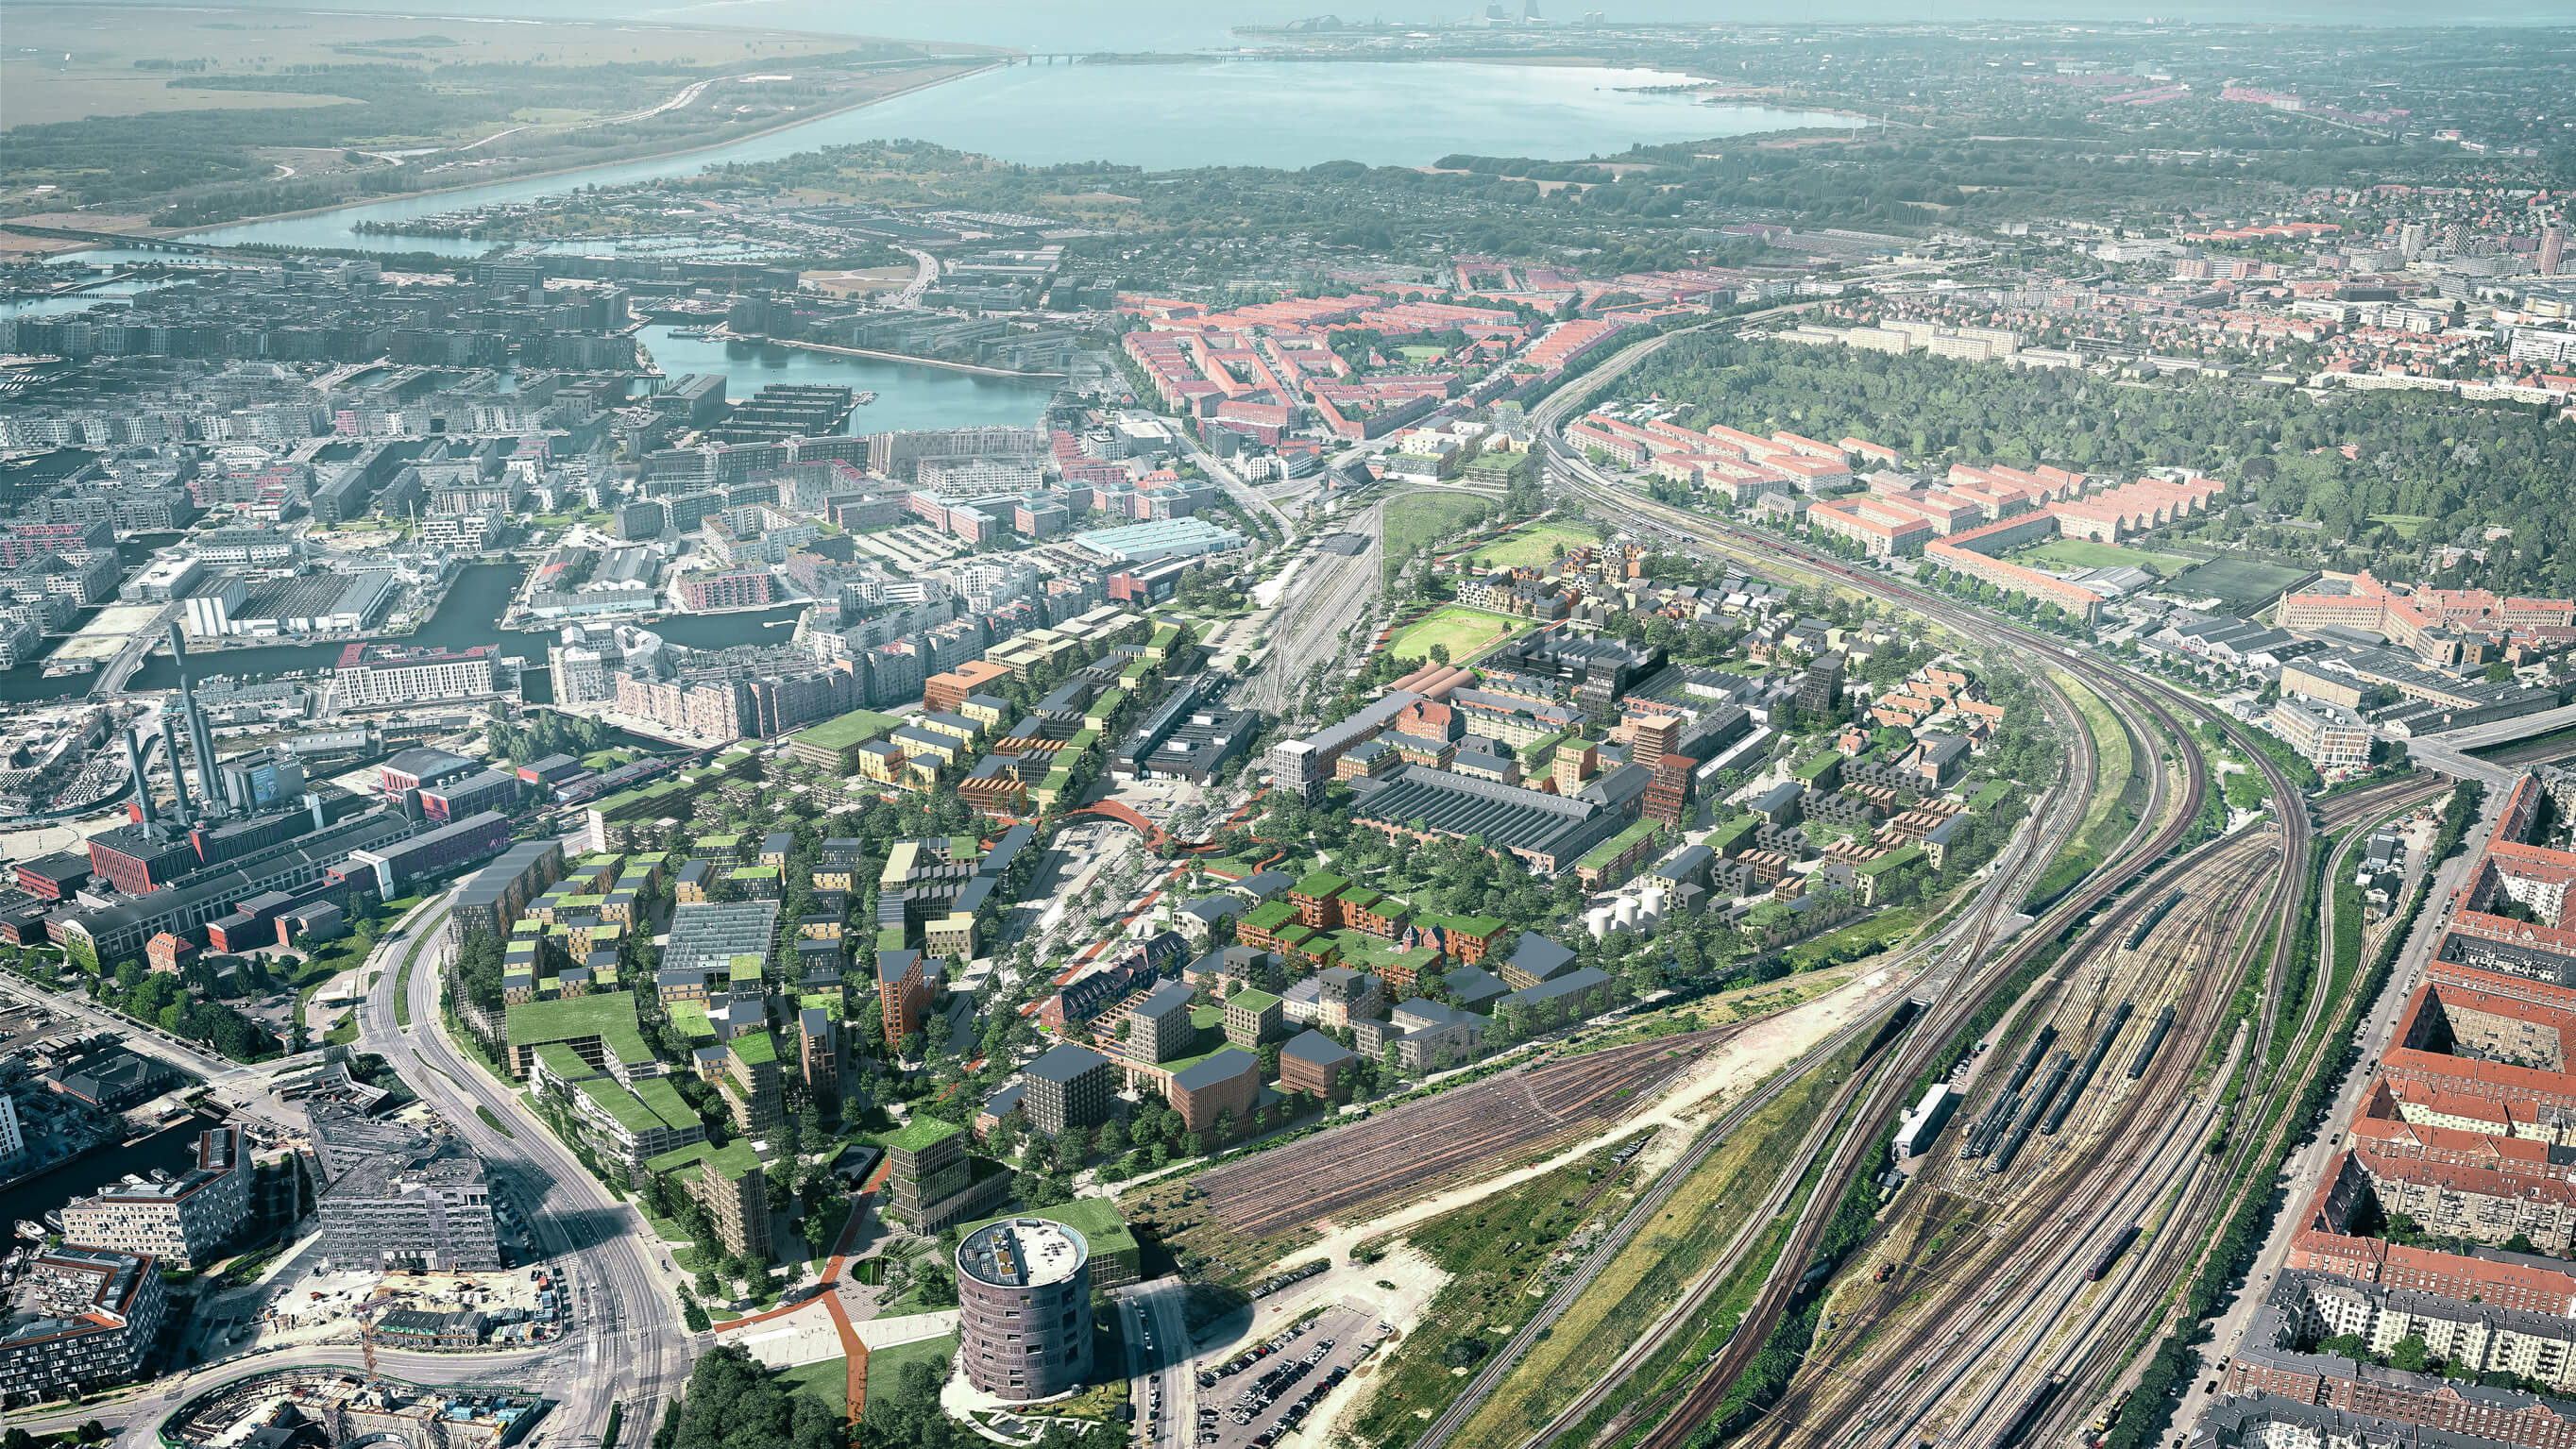 Vision for Jernbanebyen as a healthy, green and thriving neighborhood. Image from Cobe